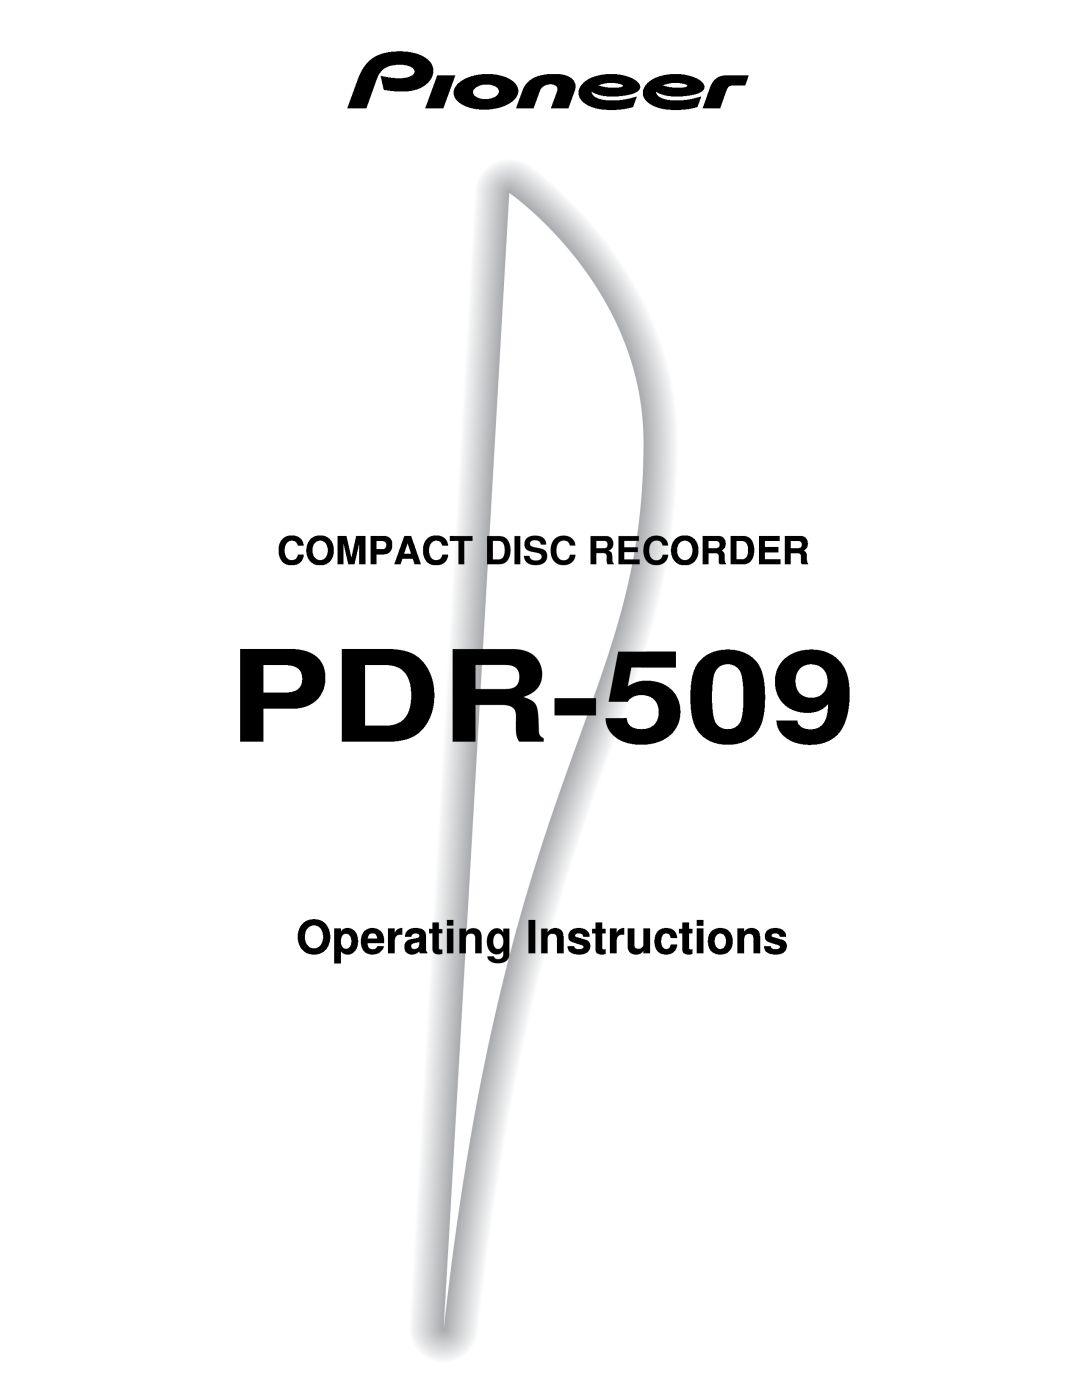 Pioneer PDR-509 manual Operating Instructions, Compact Disc Recorder 